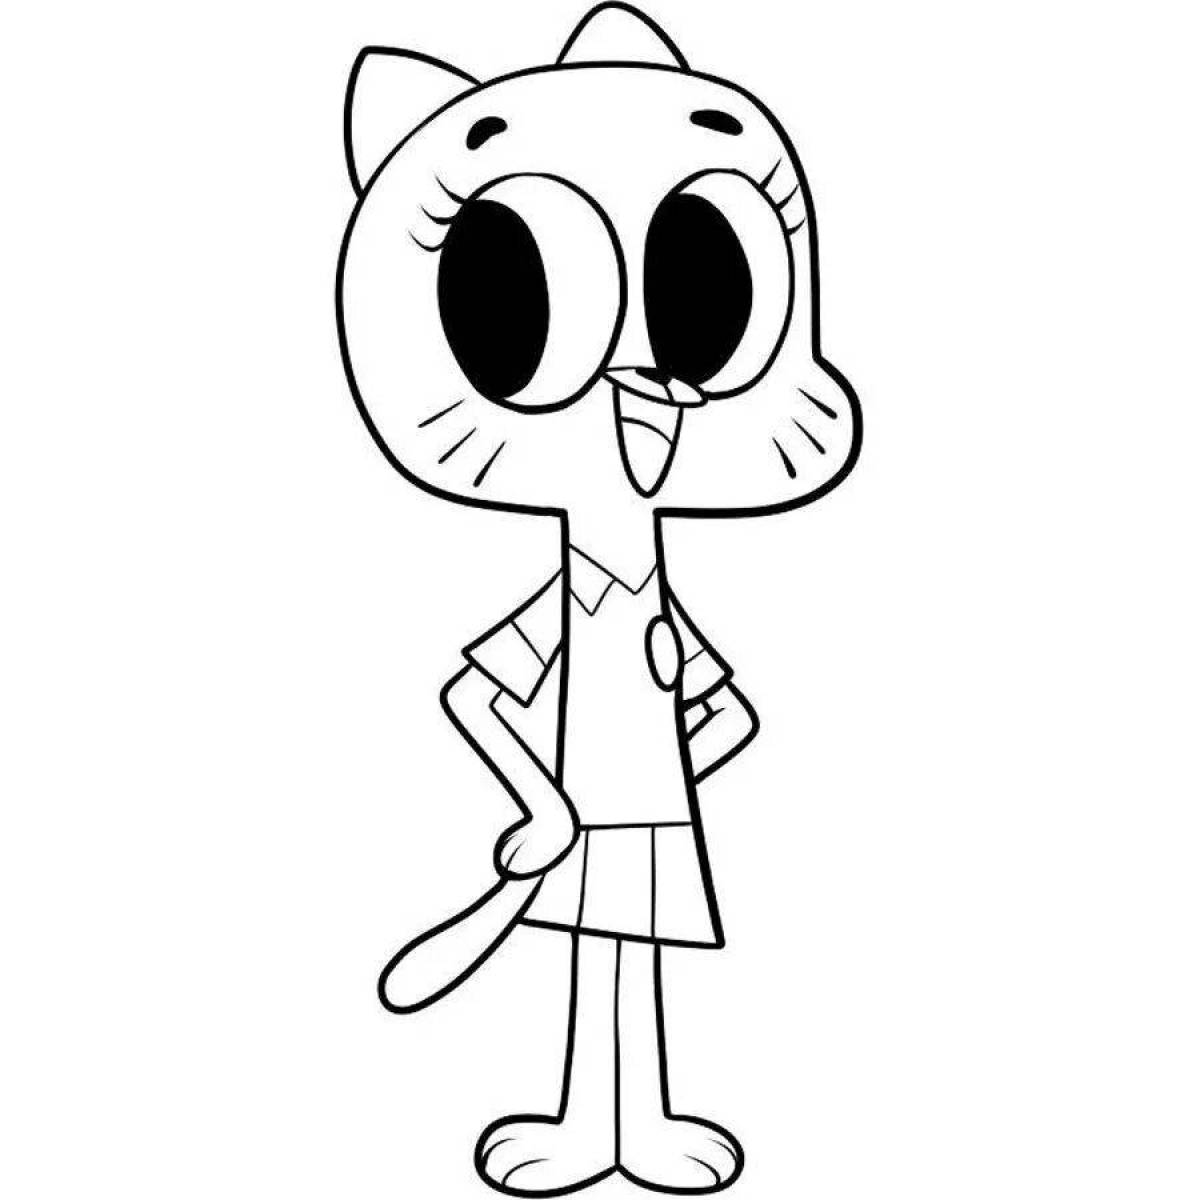 Holiday gumball coloring page